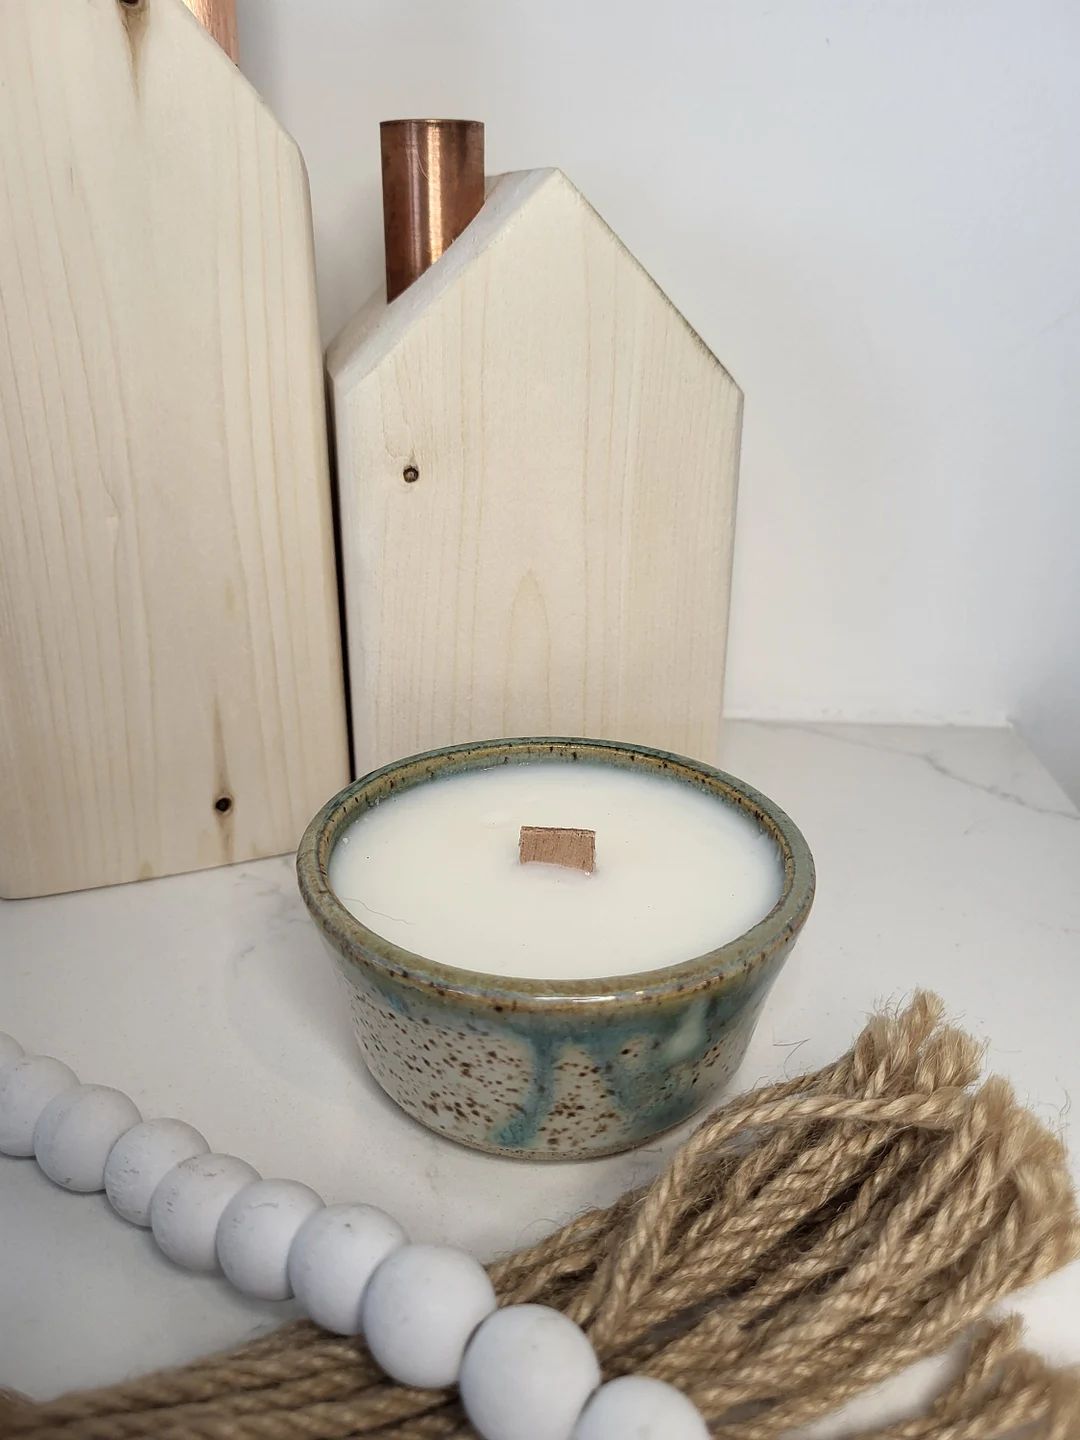 Handmade Pottery Woodwick Soy Candle | Etsy (CAD)